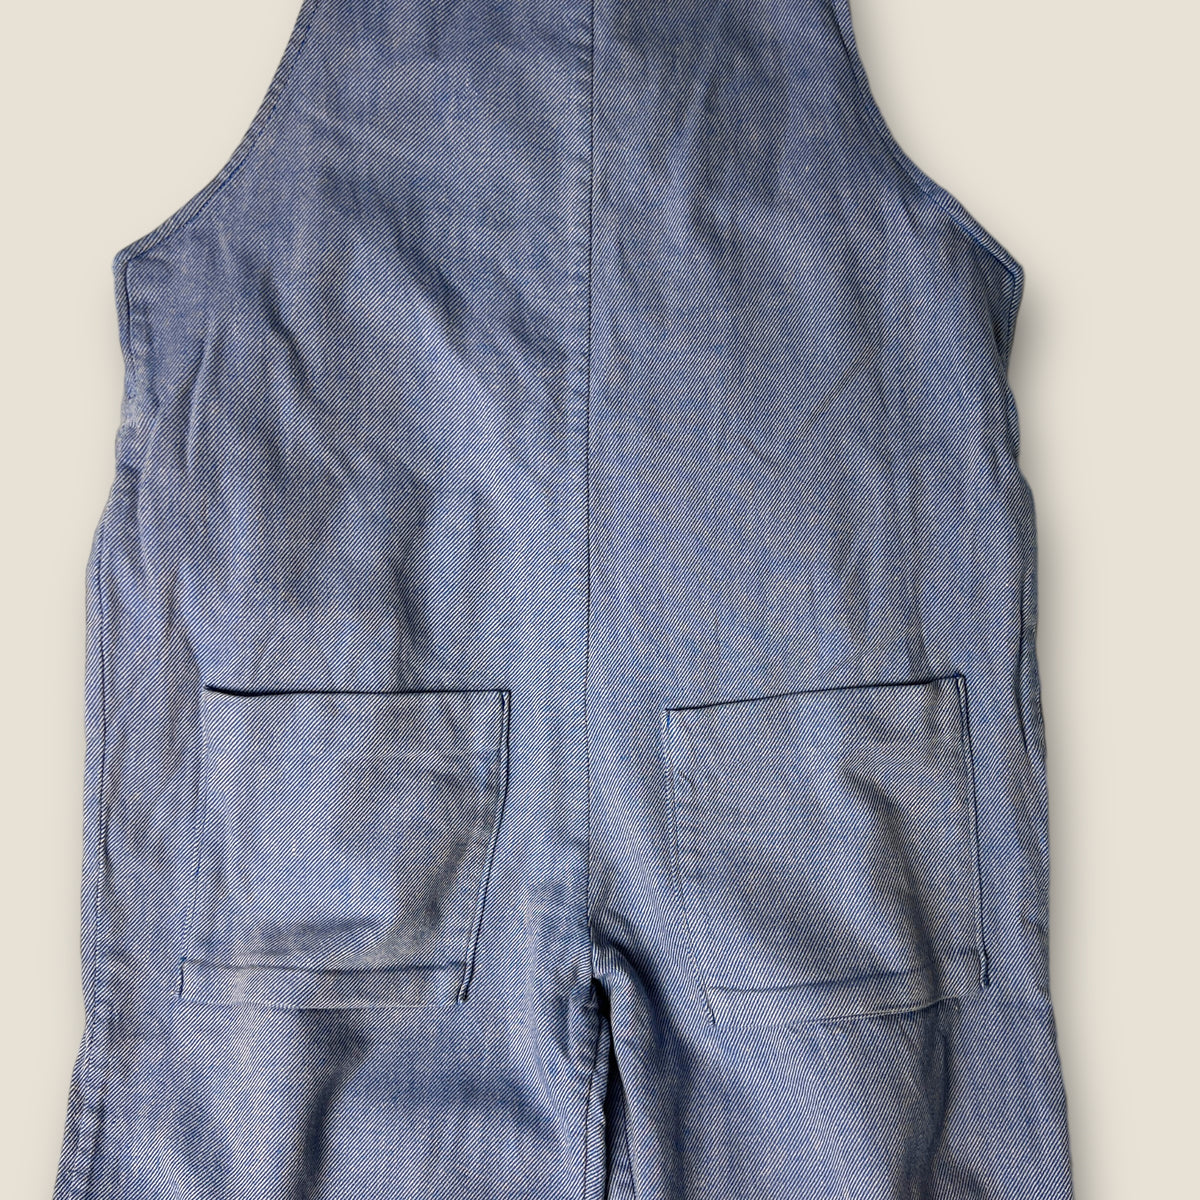 Cos Soft Cotton Dungarees size 8-10 years